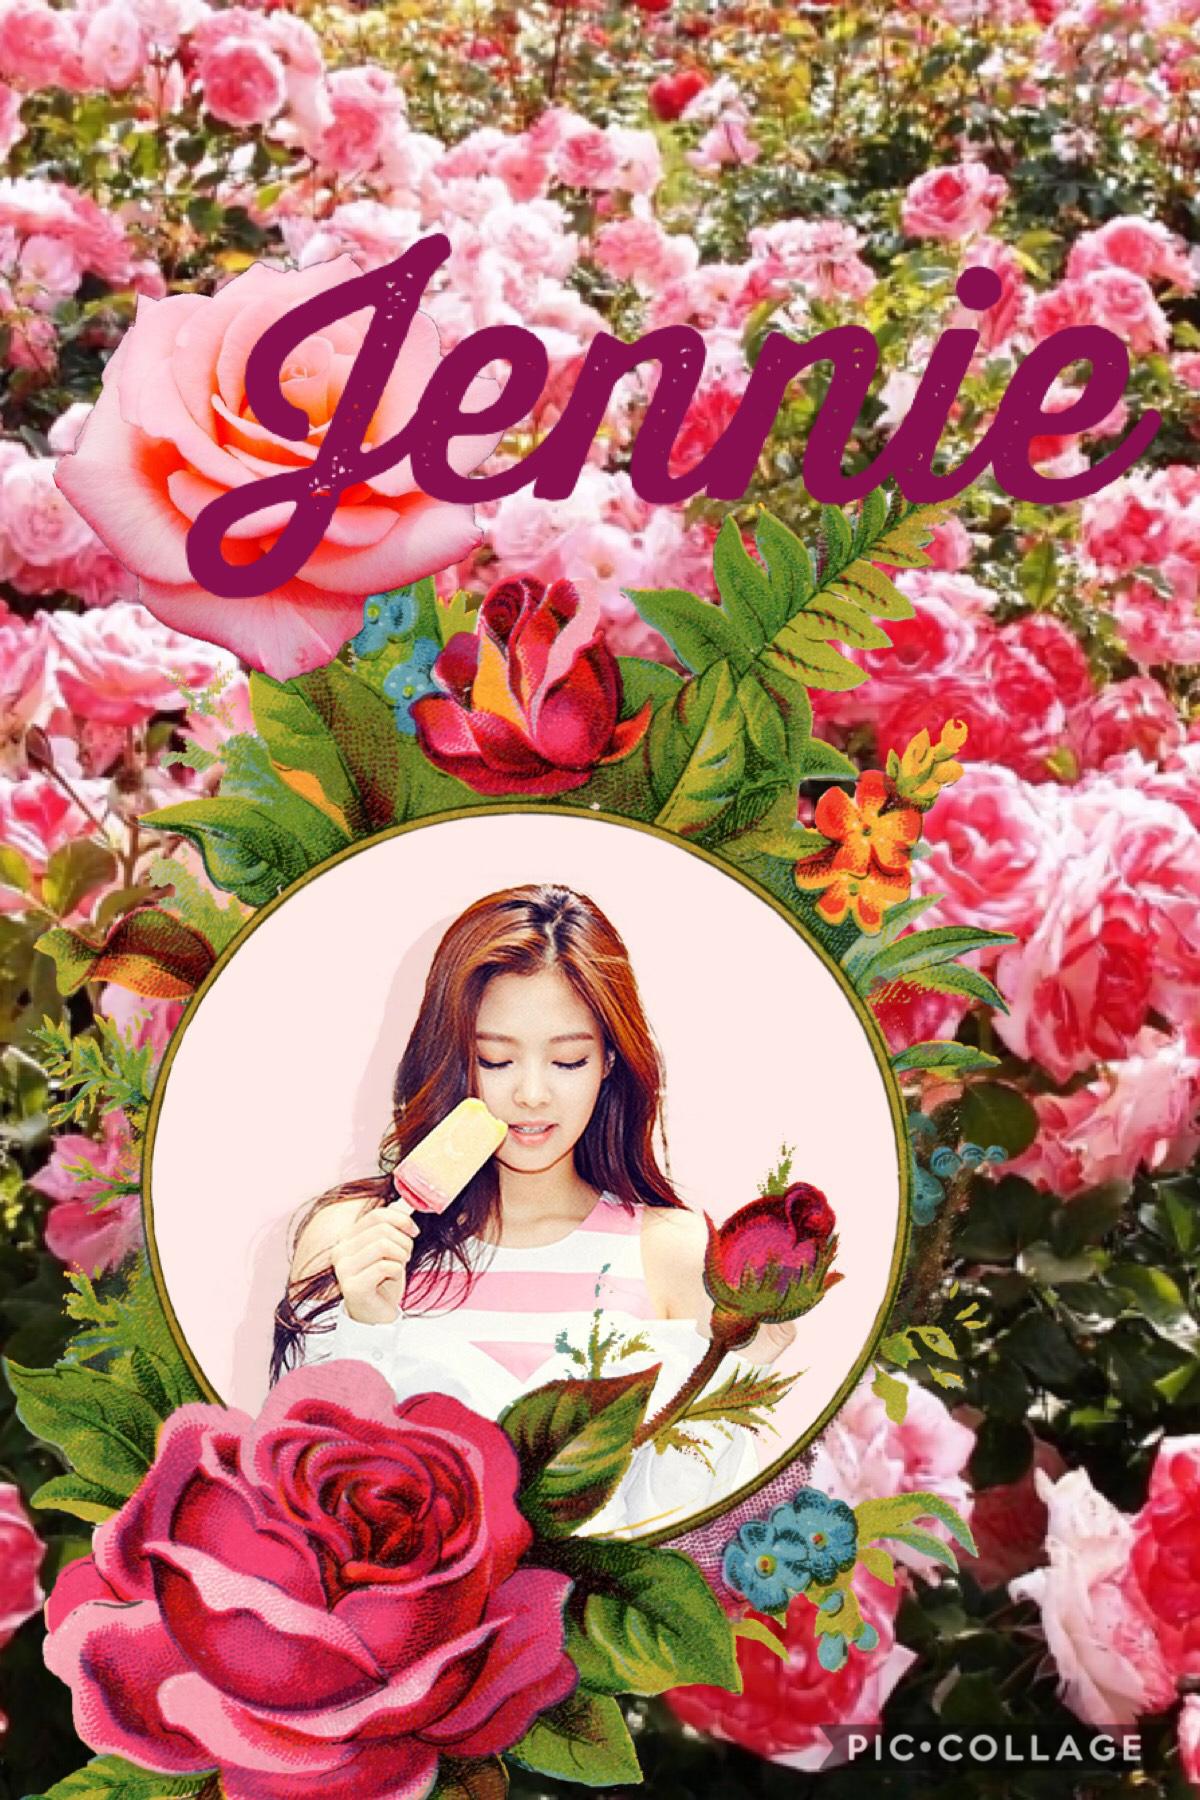 I’m still a noob at making collages but I’m still trying! Jennie!